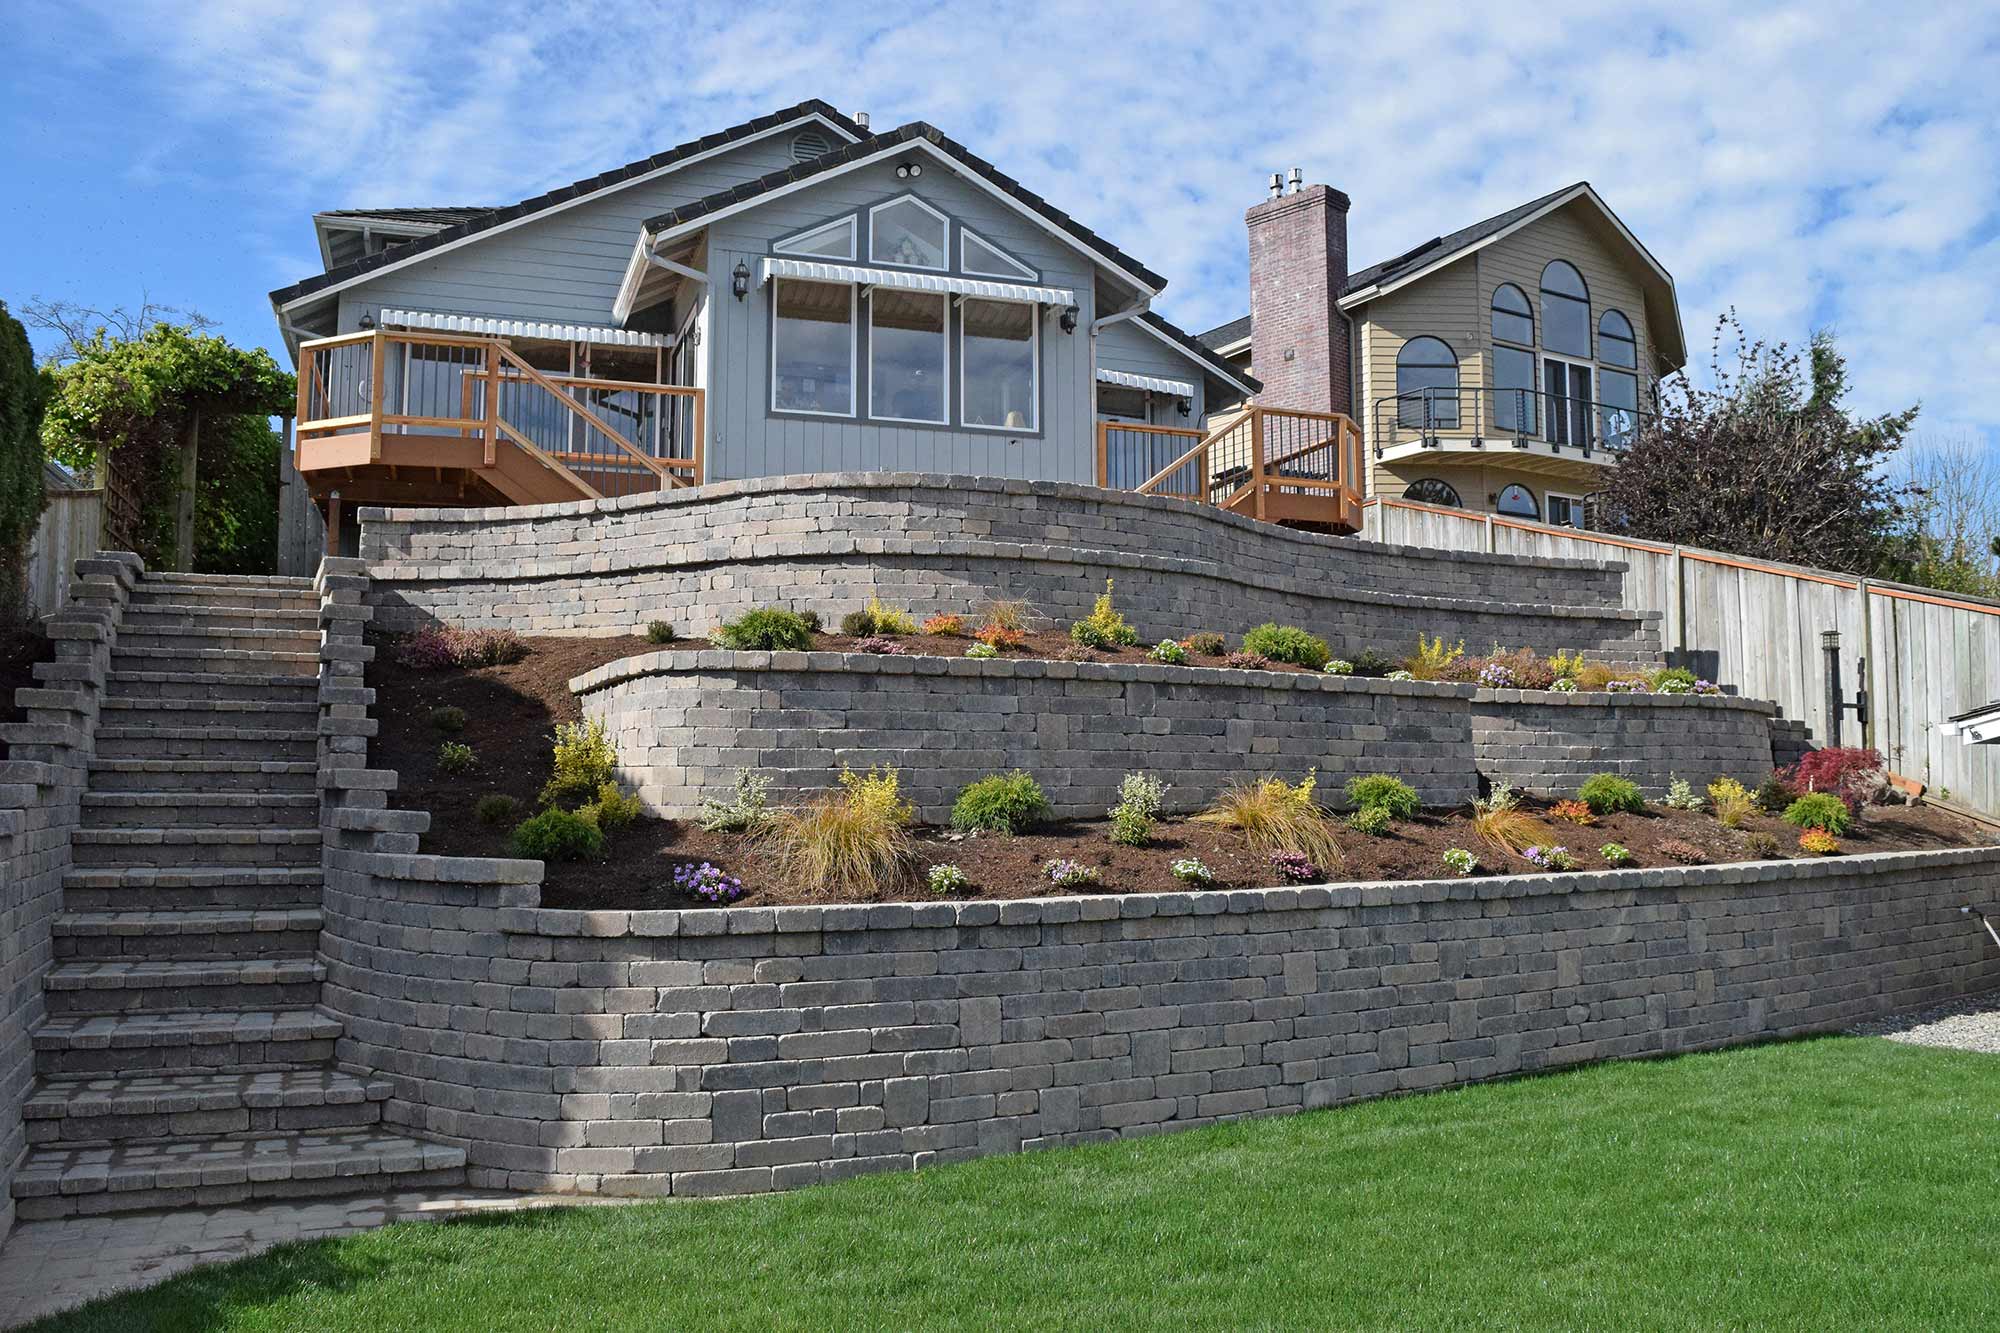 Landscaped garden with a tiered retaining wall, showcasing concrete block wall with structural terraces for erosion control, slopes, and aesthetic appeal in a residential backyard